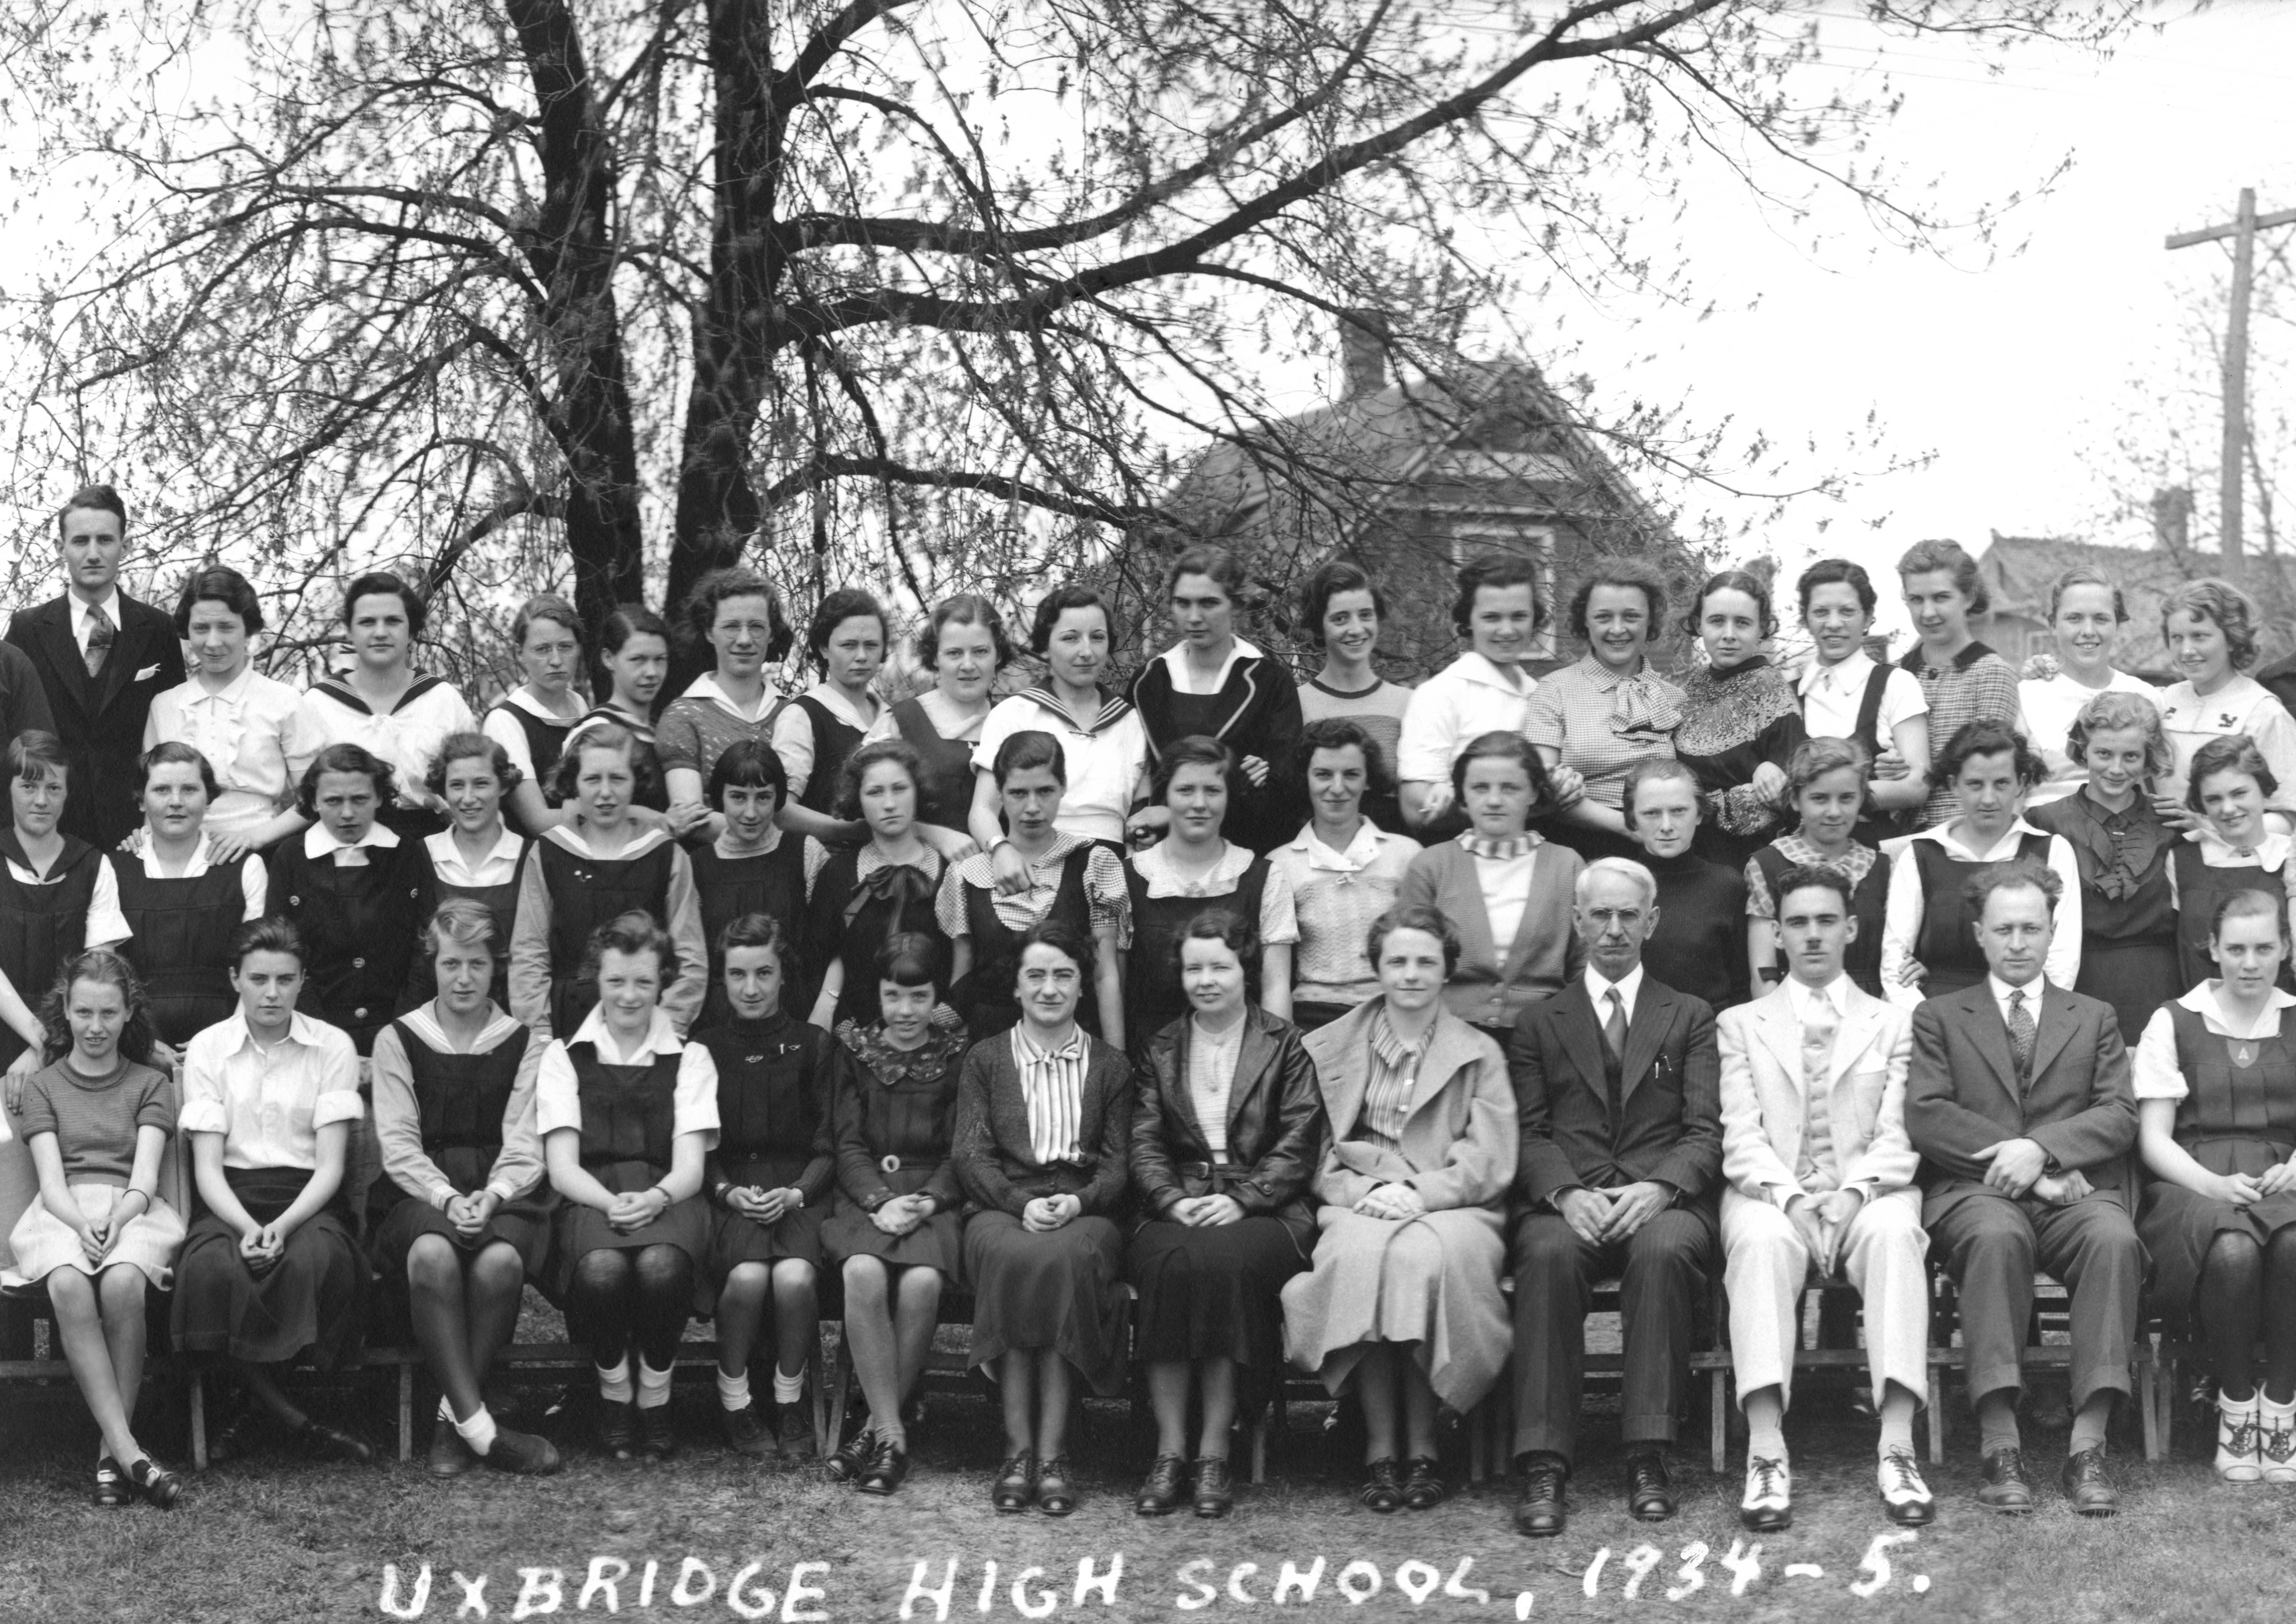 (Click to magnify (multiple levels of magnification)) ... warning very large file size  ... this photo was scanned at 2400 dpi and subsequently photoshopped to eliminate water damage and other visual artifacts). The principal, J.E. Burchell, is in the fro